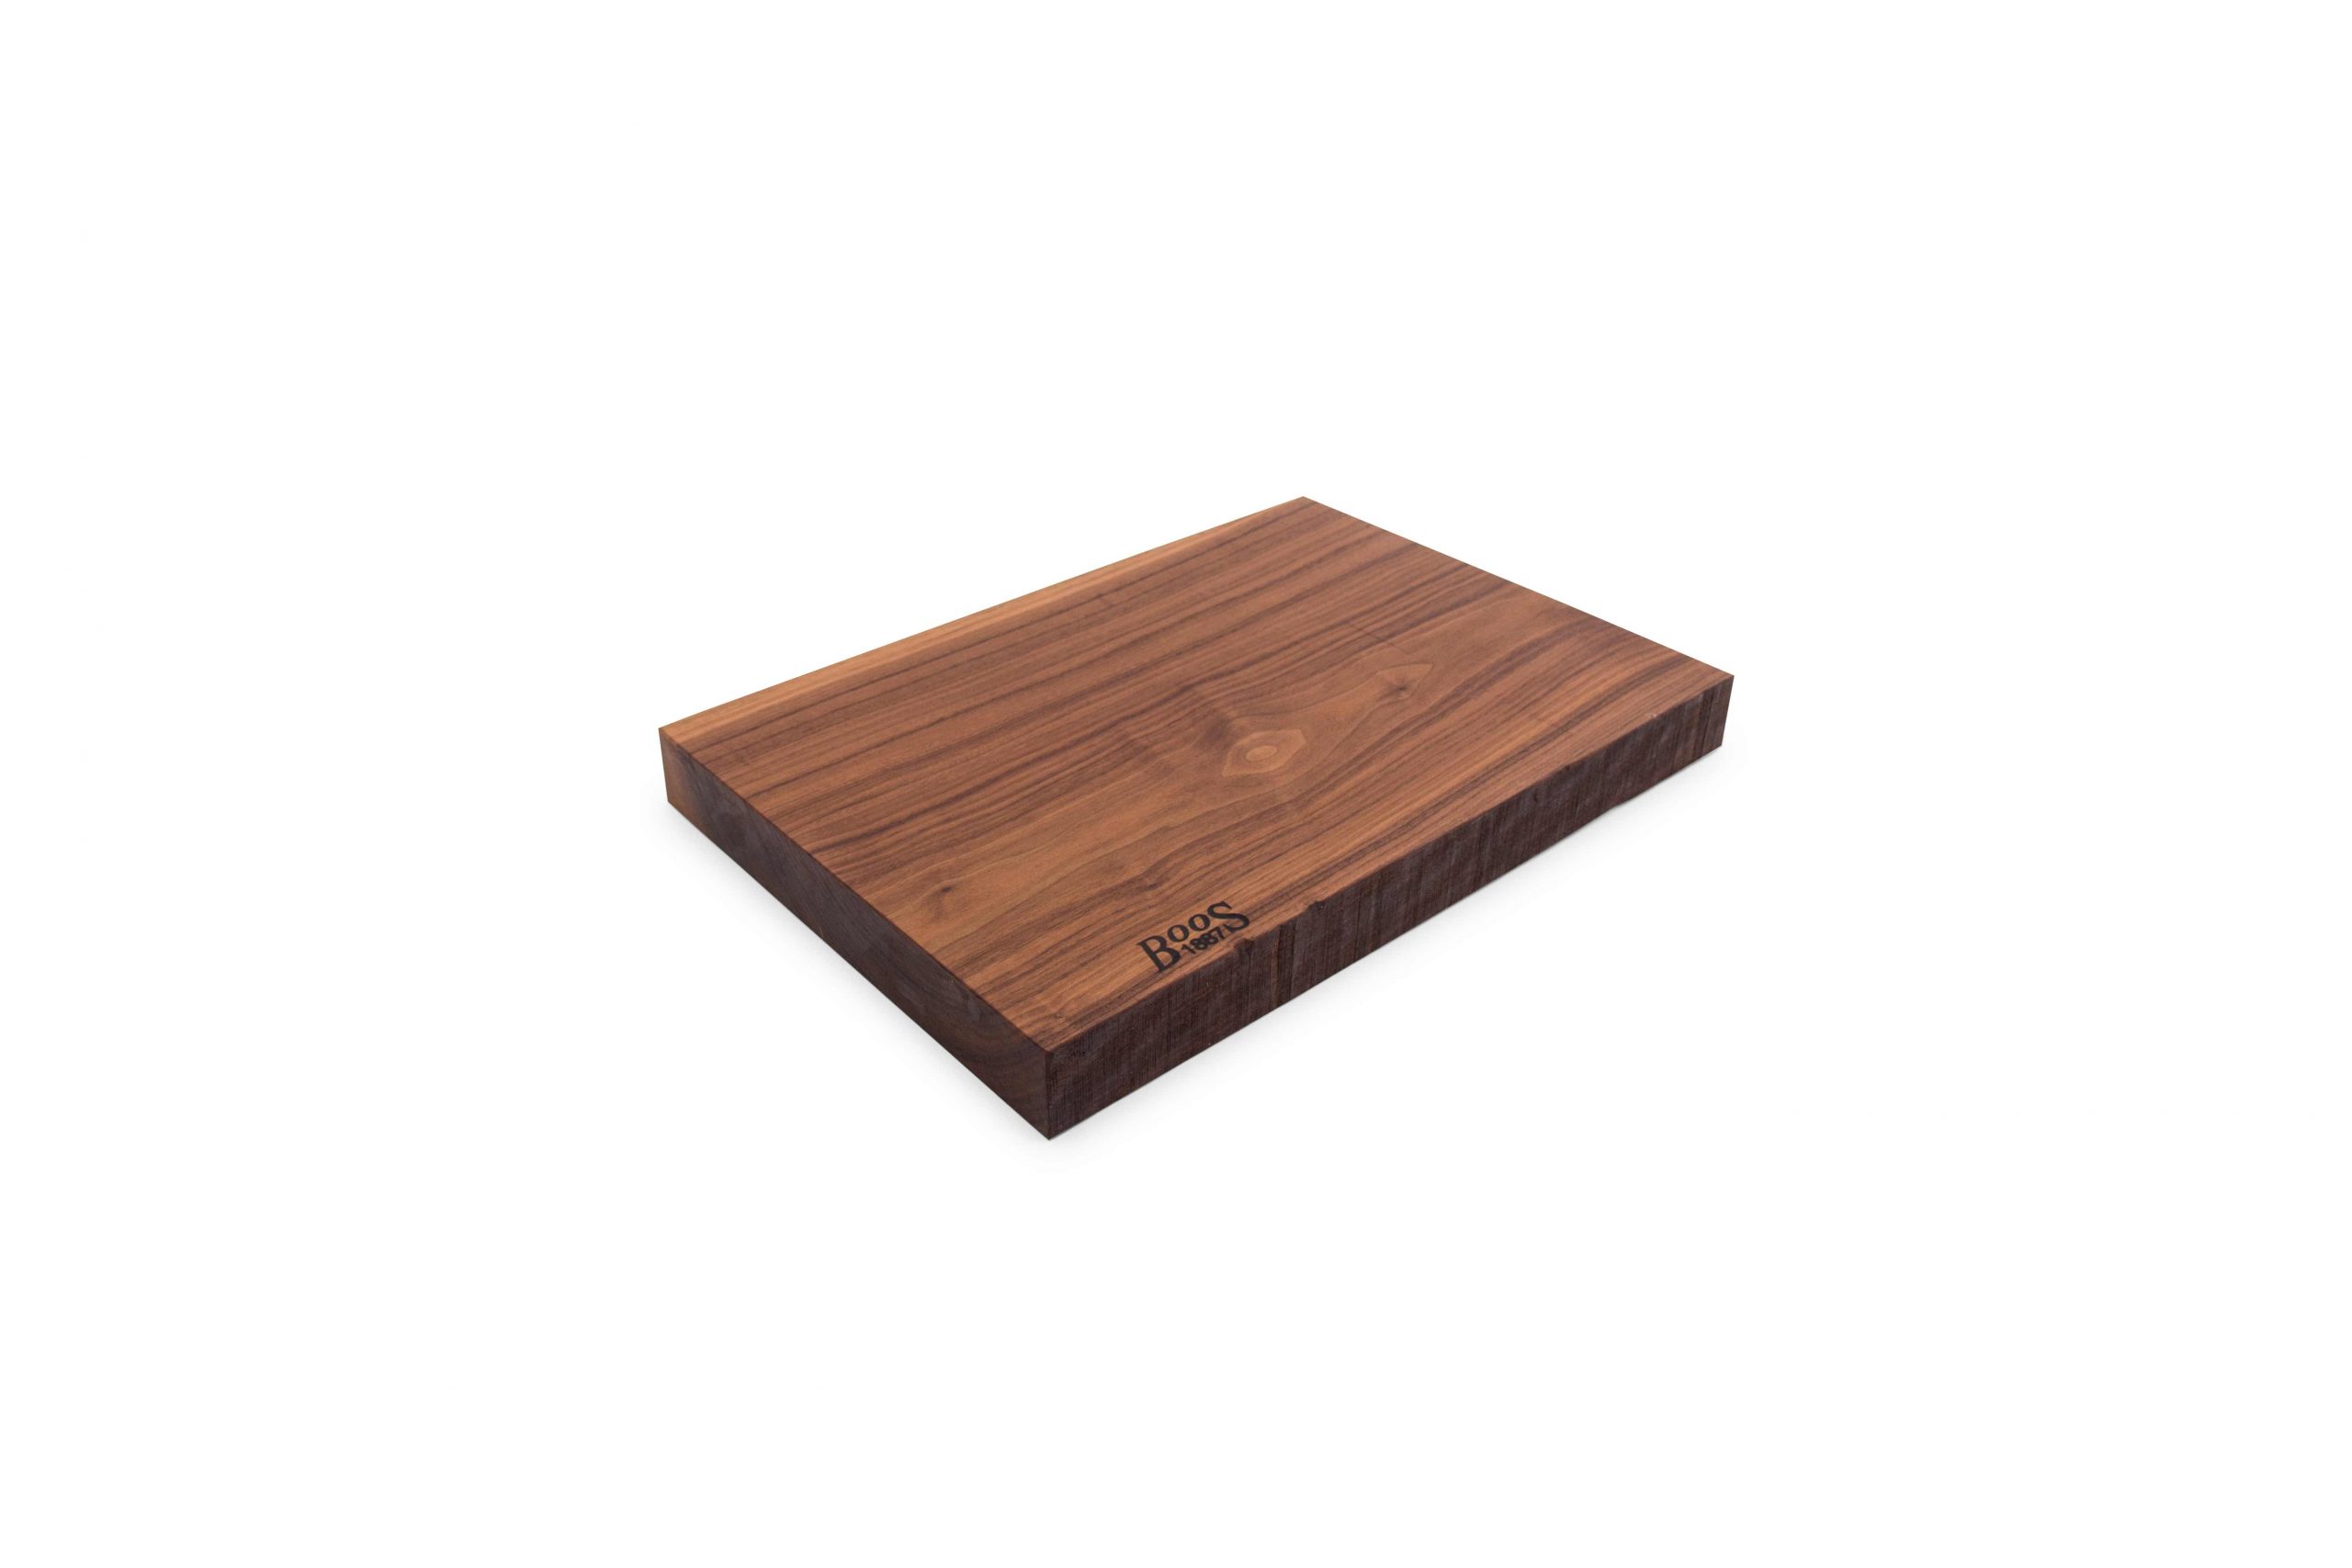 Boos 1887 / Rustic Edge one piece cutting board; Black Walnut; can be used on both sides 3